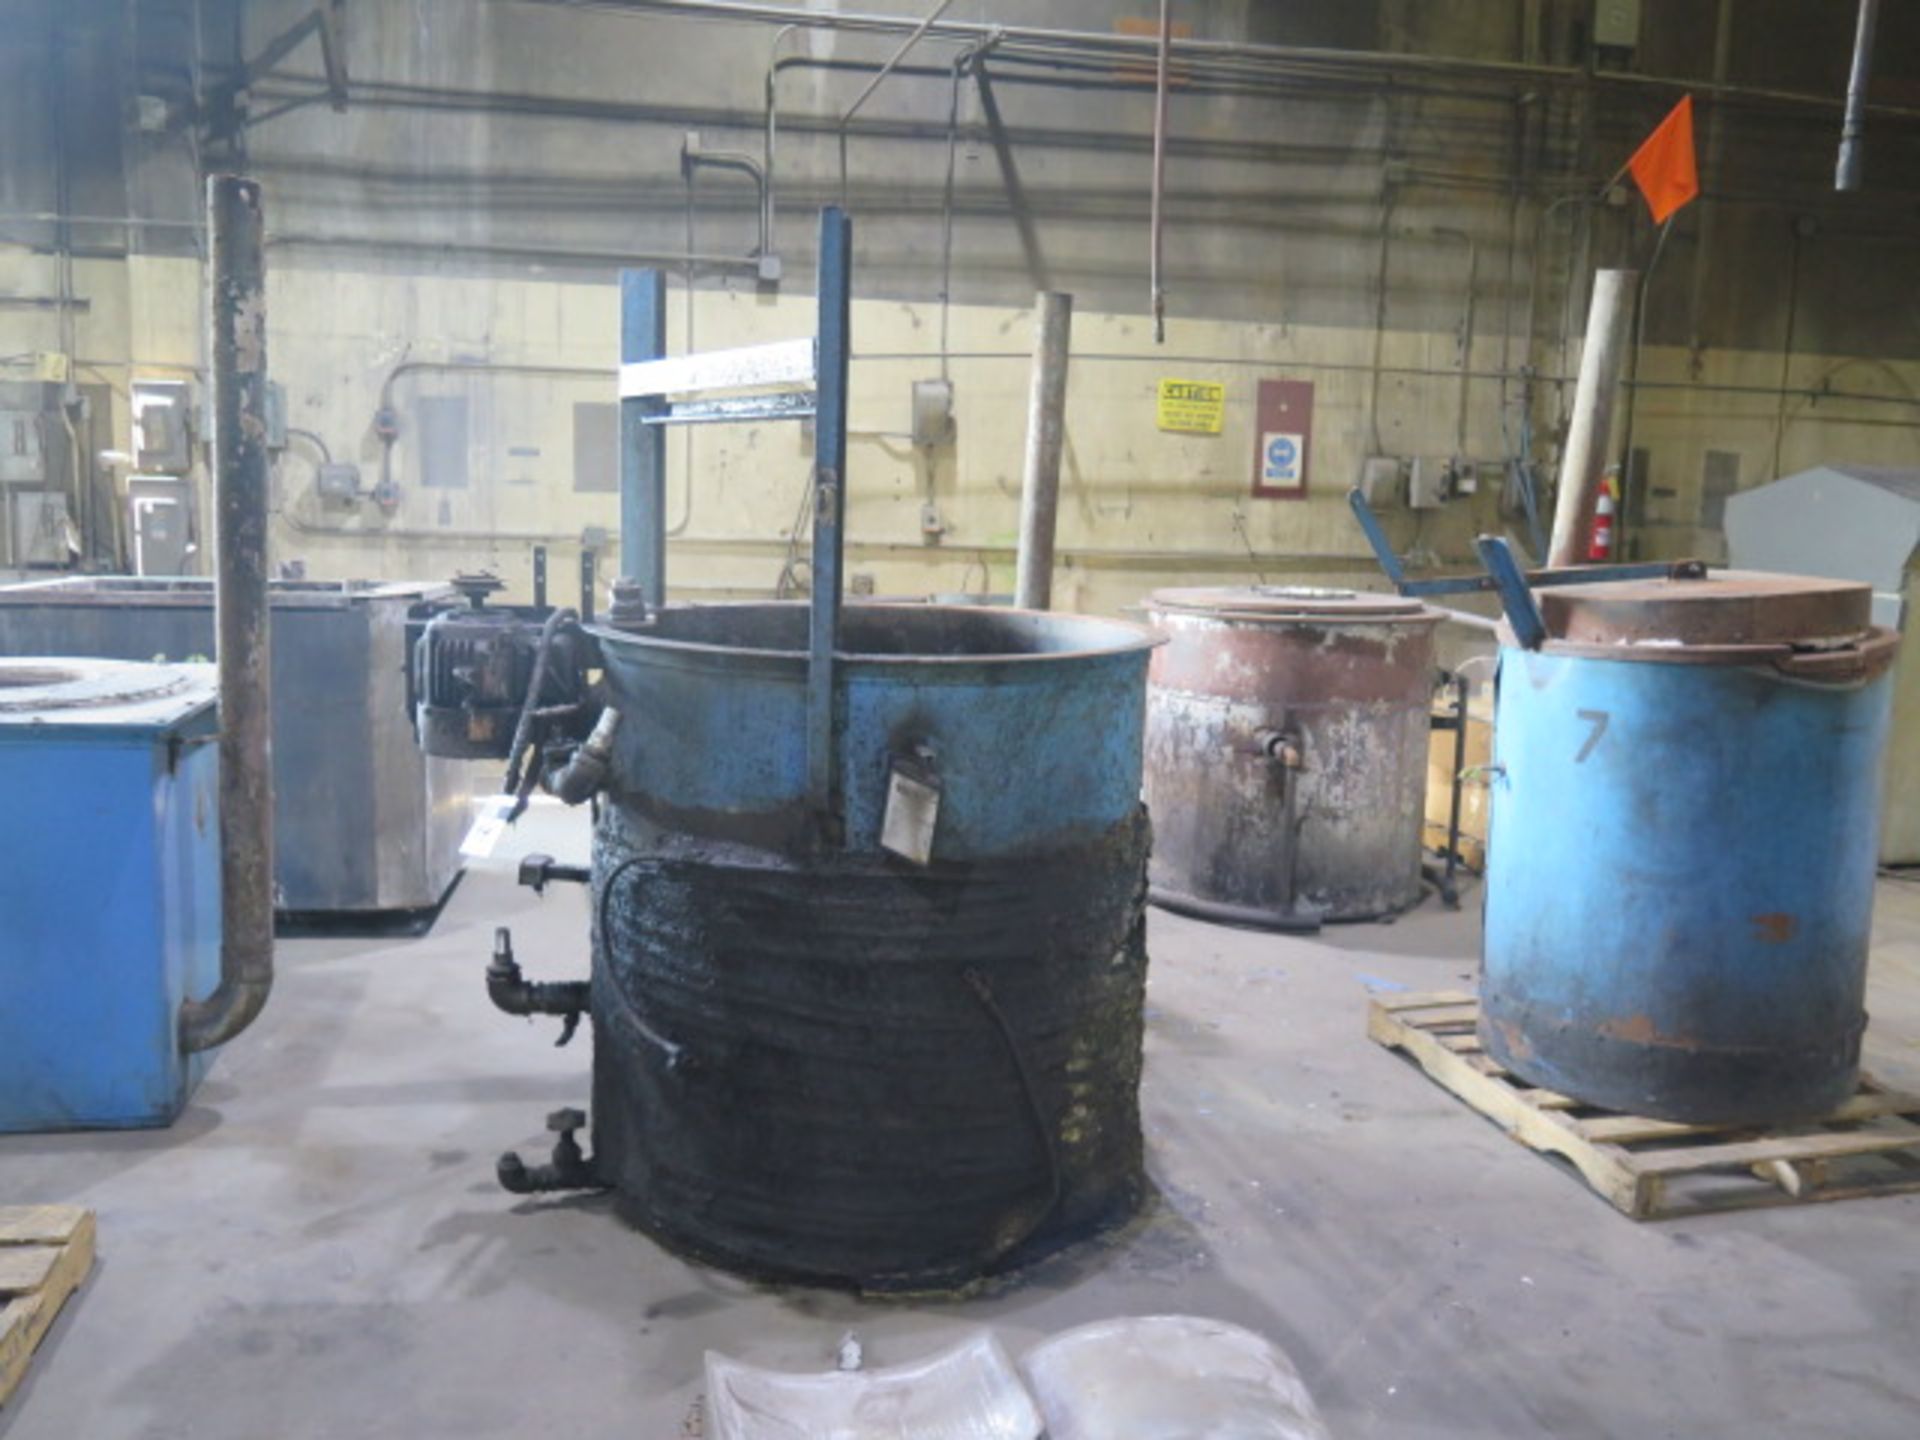 Neutral Salt Bath System w/ Furnaces, Salt and Oil Quench Tanks - Image 4 of 4